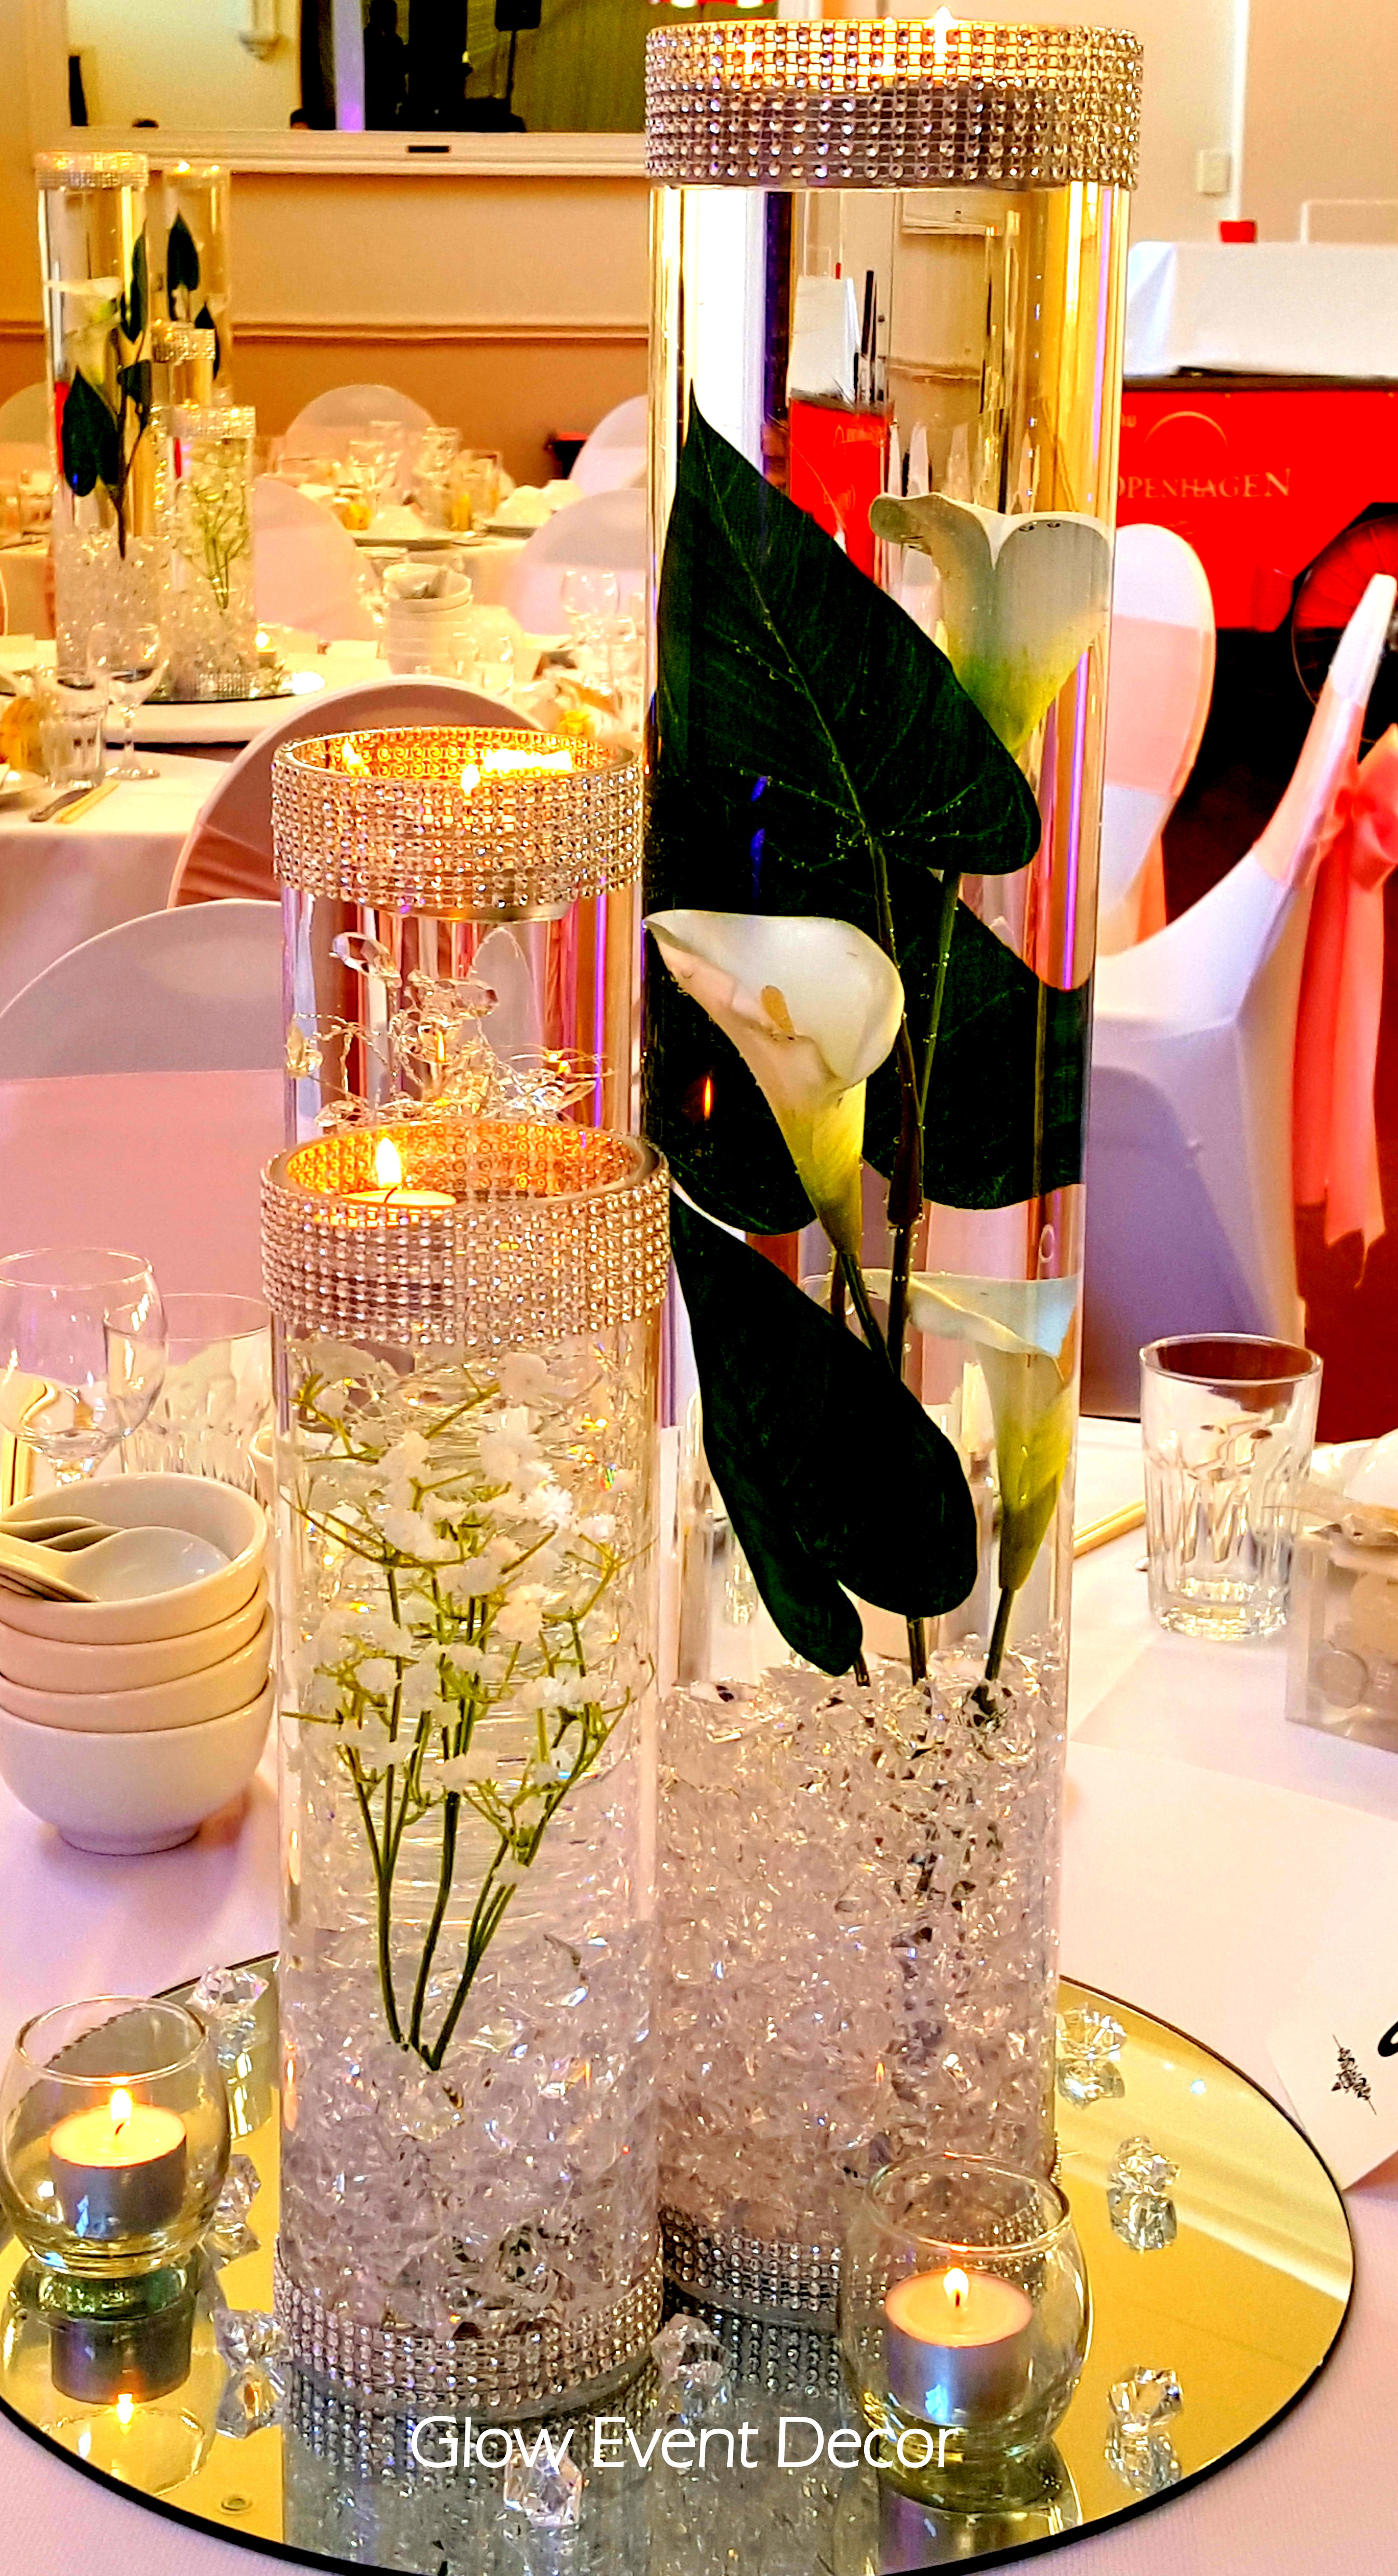 24 Recommended Extra Large Brandy Glass Vase 2023 free download extra large brandy glass vase of led orchid cylinder vase glow event decor within cylinder vase trio submerged lillies gyp sophlia bablies breath crystal garland for bridal